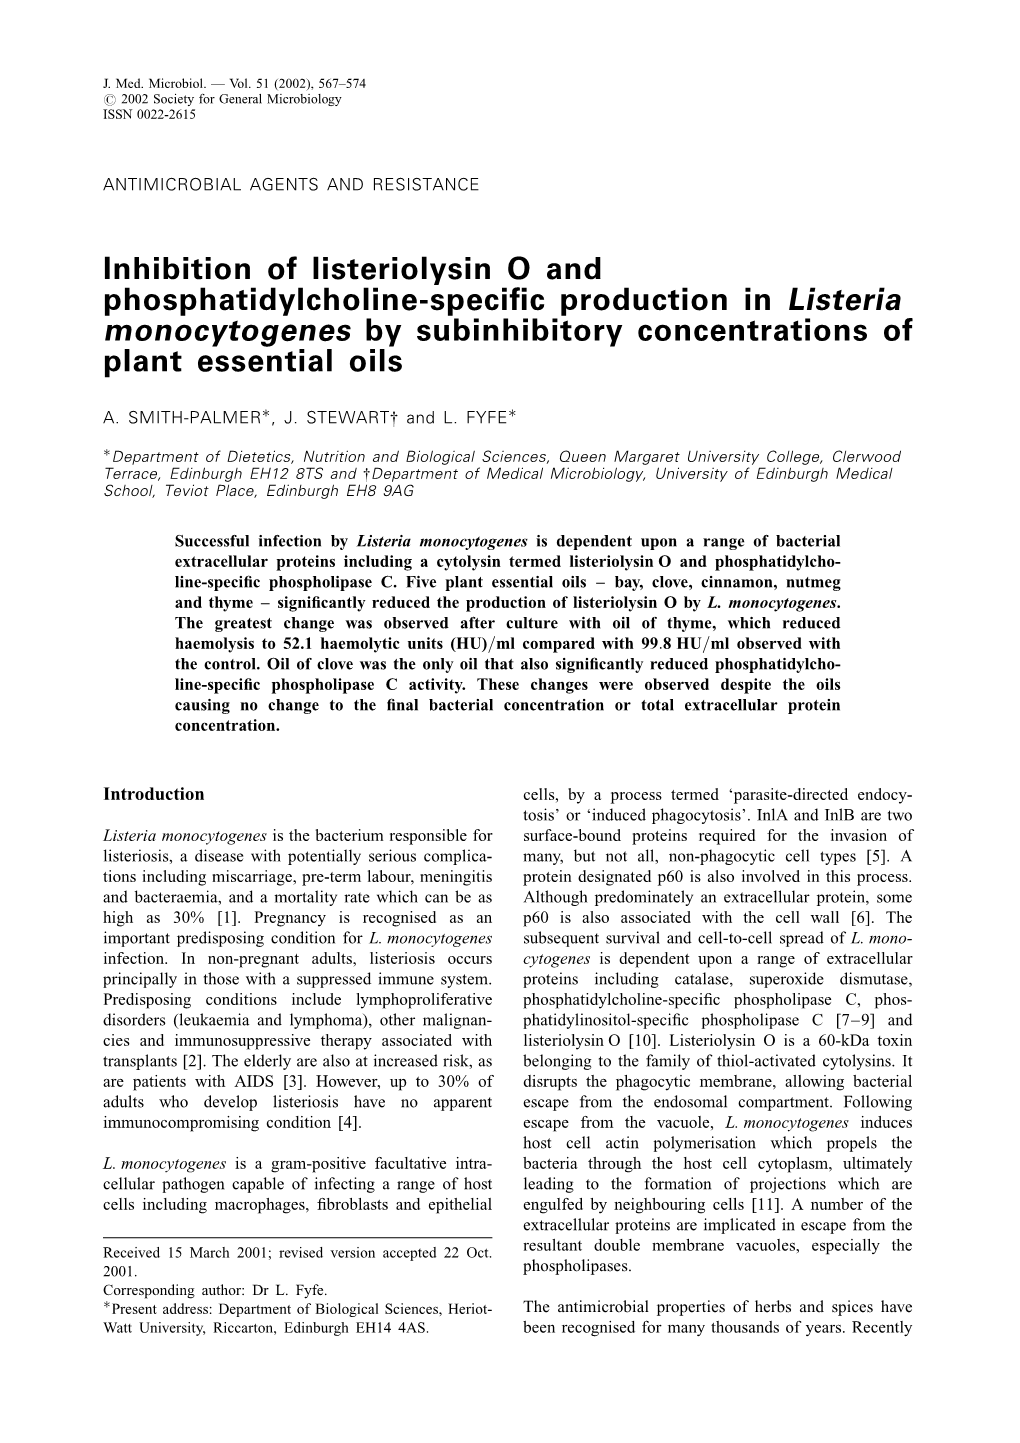 Inhibition of Listeriolysin O and Phosphatidylcholine-Specific